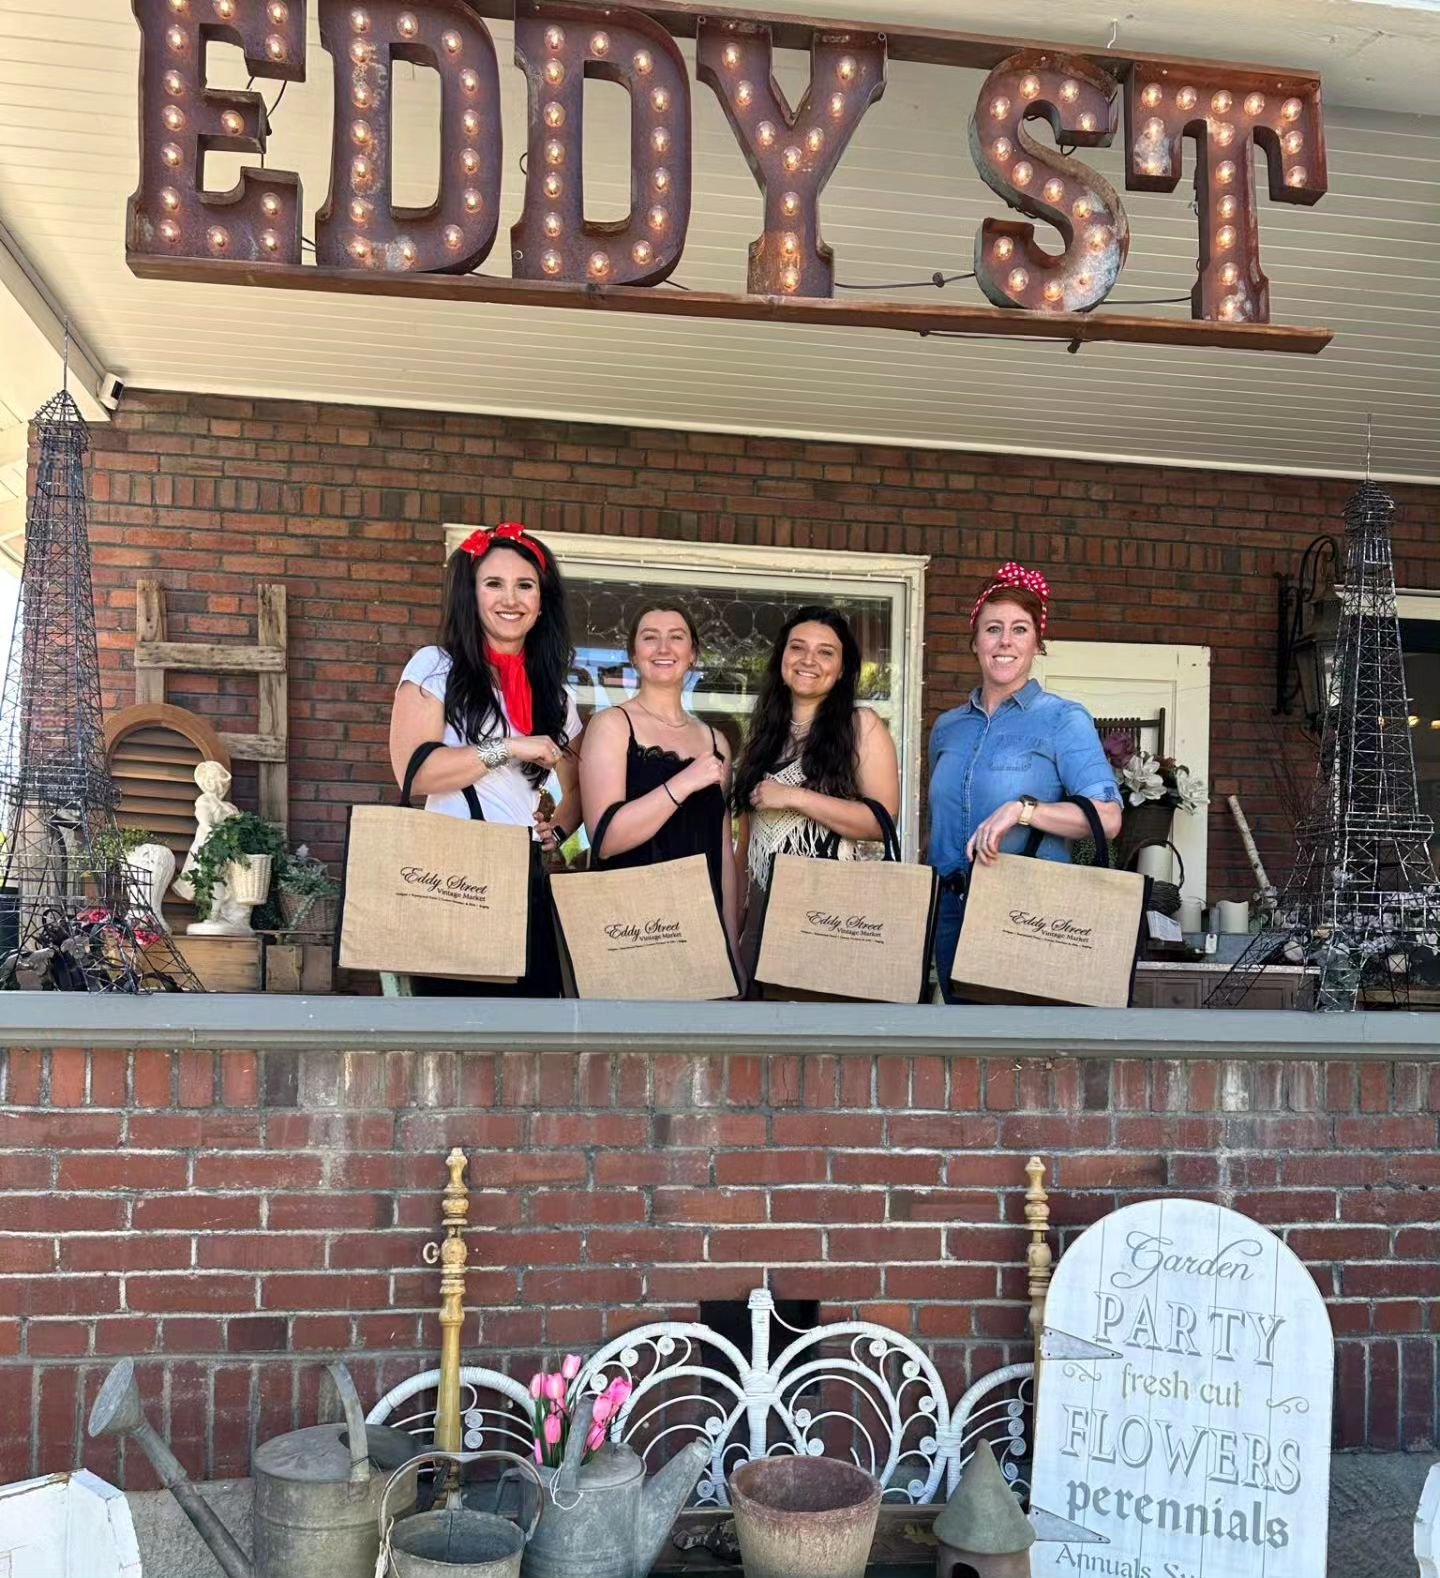 Today's the LAST DAY of our Dancing through the Decades 10th Anniversary Pop-up! And, we have Eddy Street Totes available! They are perfect for loading up with all your Eddy Street goodies!

Doors are open! Plus, @grandpa_archies will be here for Sun